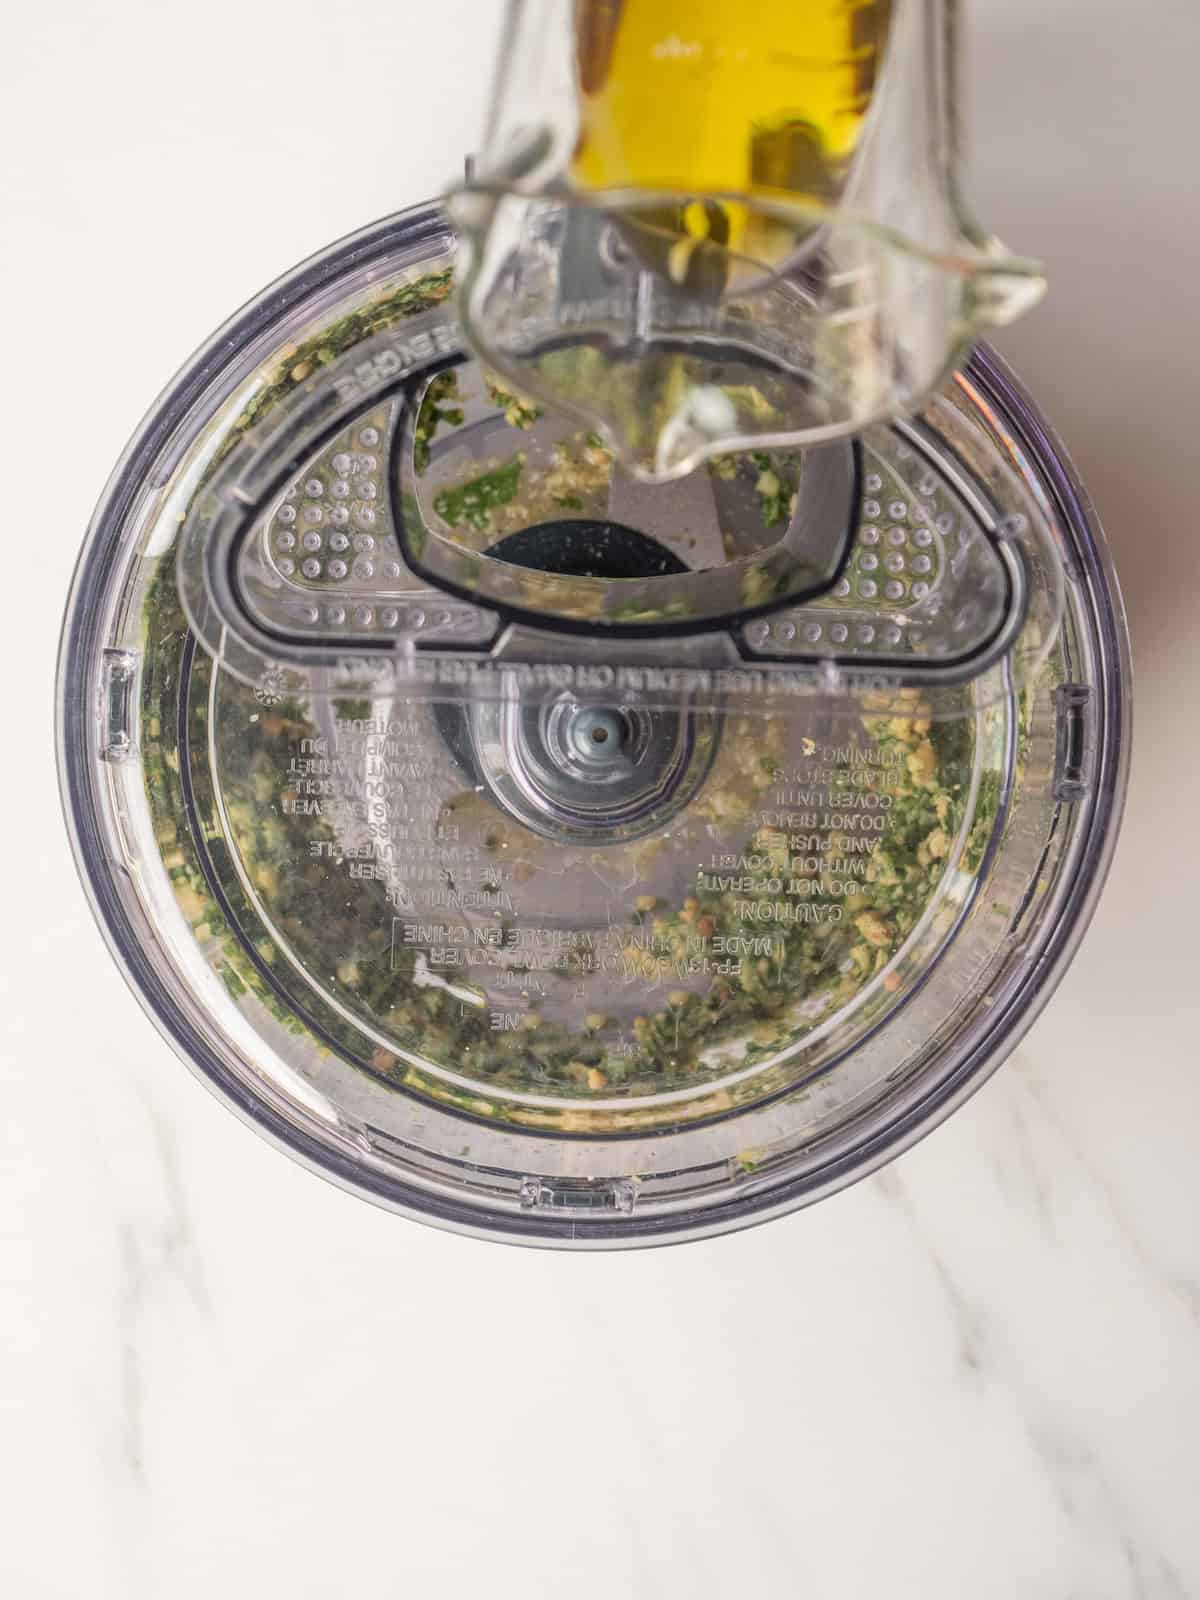 An overhead shot of a food processor with basil pesto being made and olive oil being drizzled into as its blending.